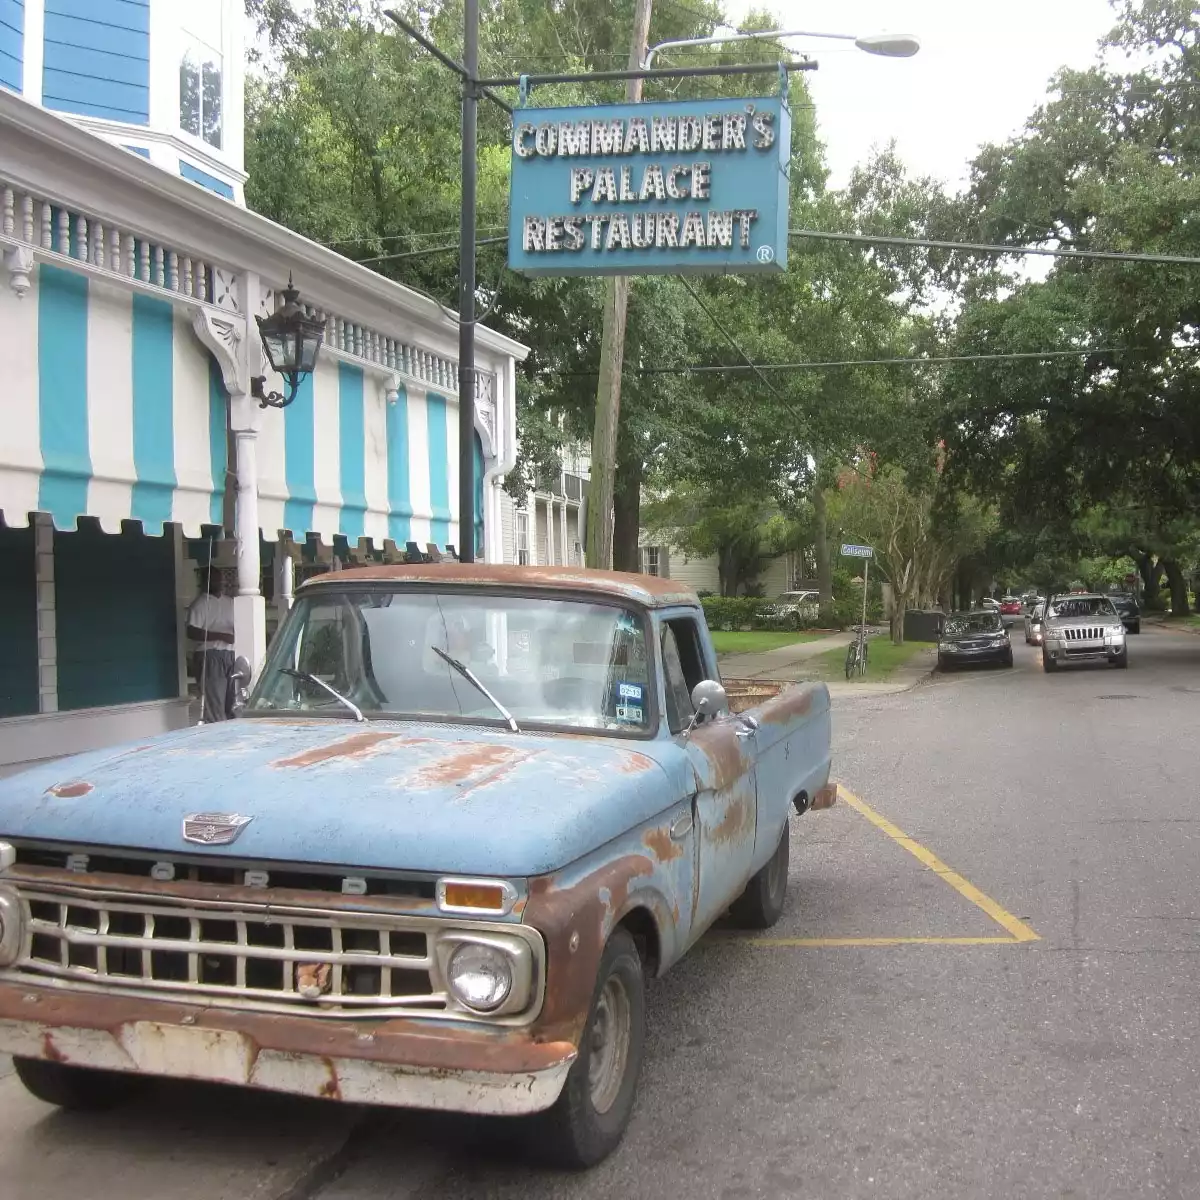 A vintage blue truck parked parallel in front of Commander's Palace in New Orleans. The tree-lined street stretches away in perspective.